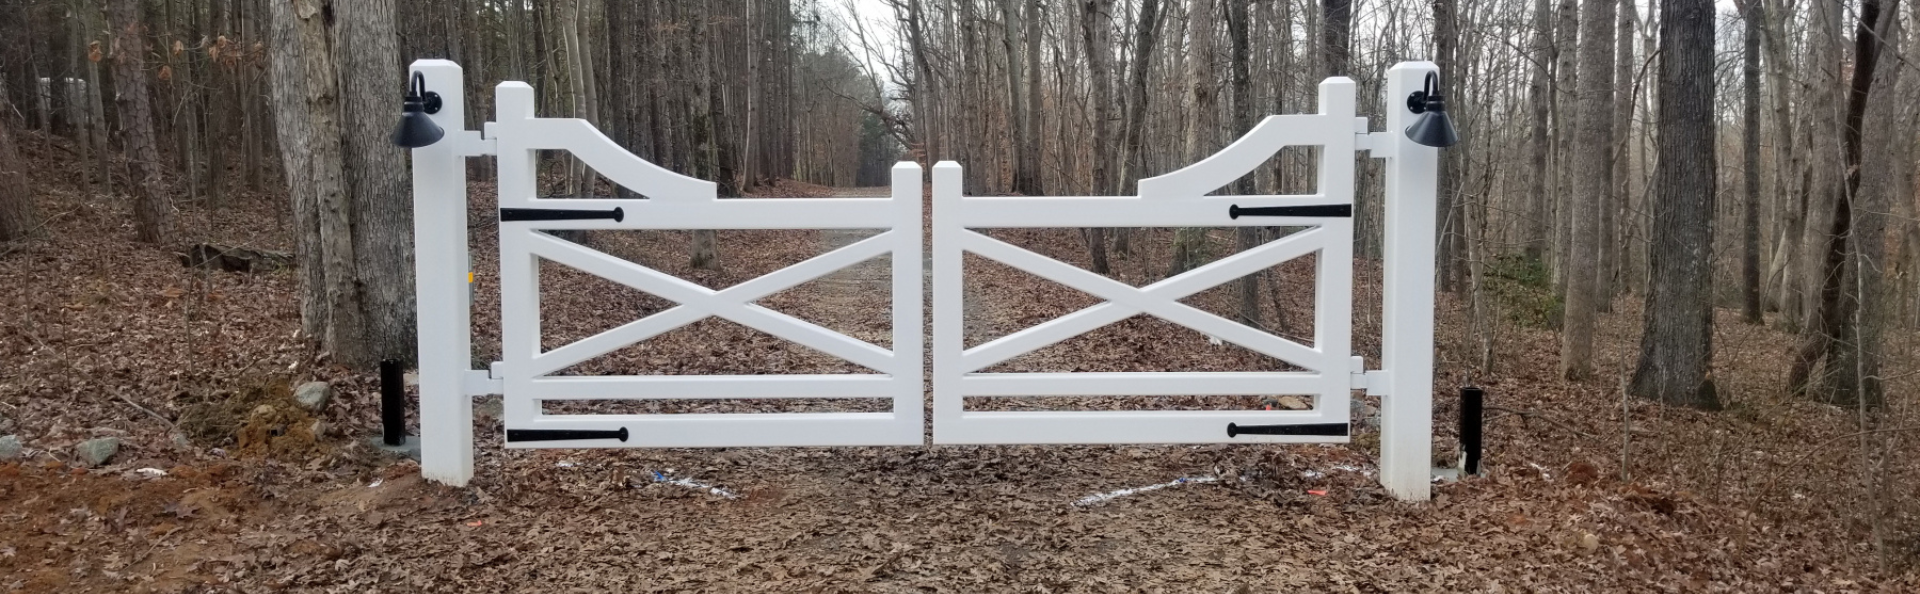  CUSTOM FABRICATED GATES TO YOUR SPECIFICATIONS